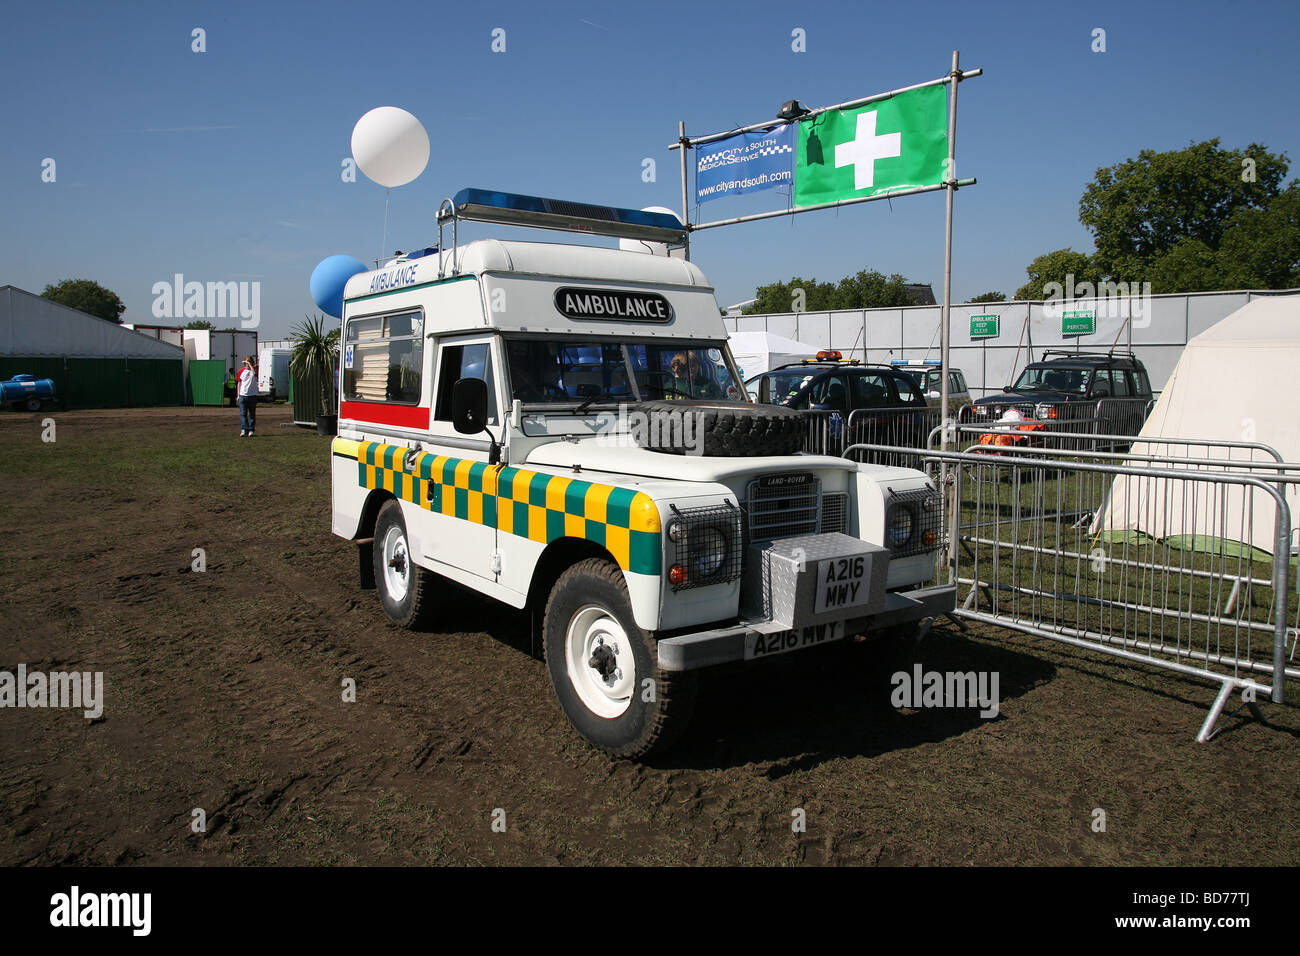 Series 2 Land Rover ambulance awaits casualties at a first aid post during a music festival. Stock Photo